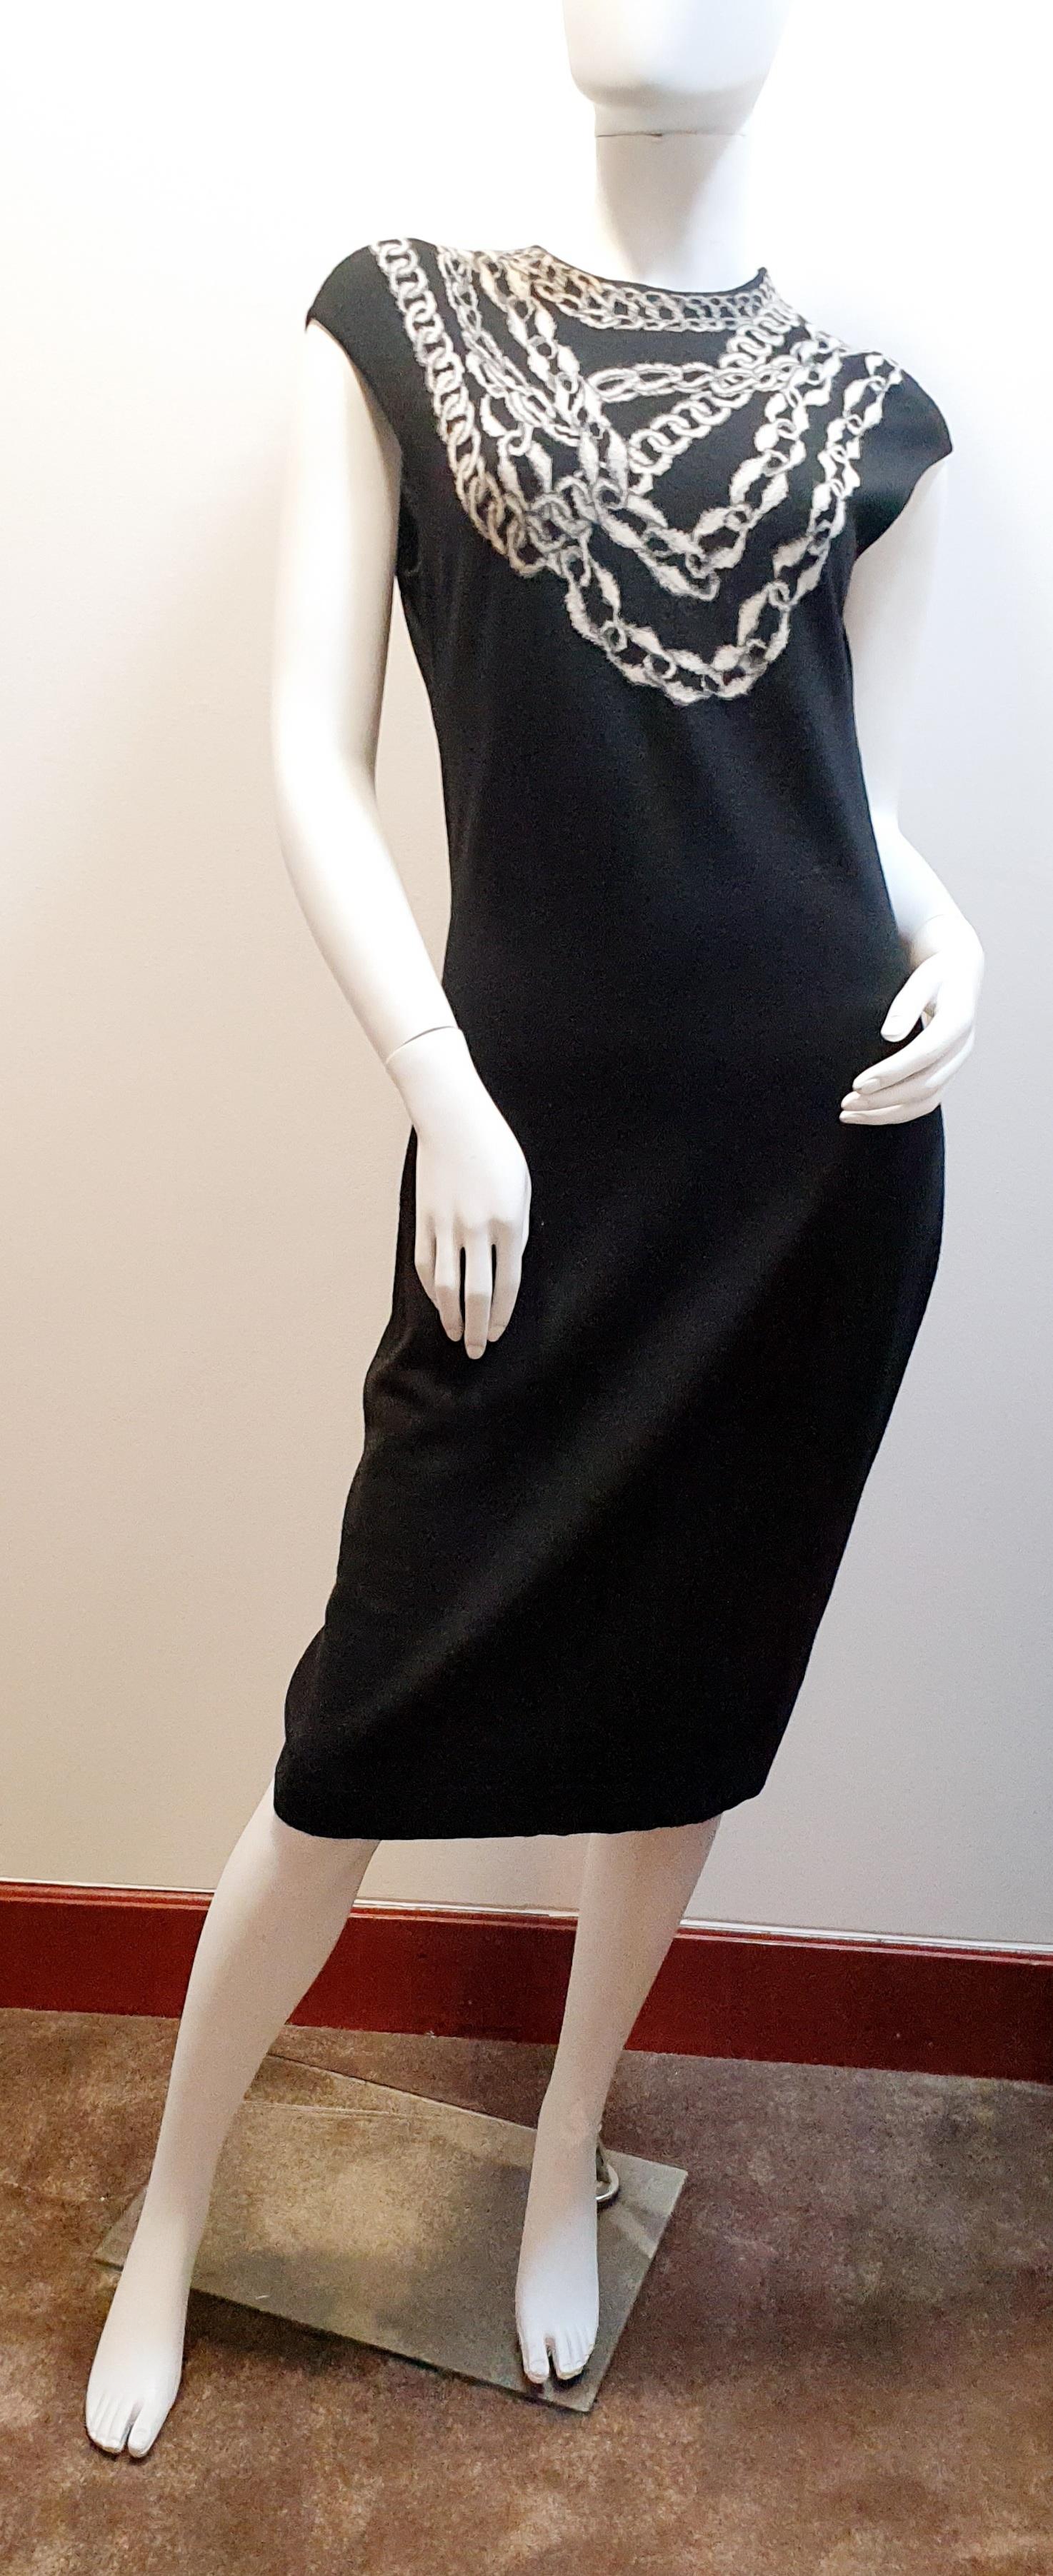 Alexander Mcqueen black Wool Midi Dress with jewel embroided chains
Beautiful vintage cap sleeve merino wool dress from Alexander McQueen. Chain detail around the neck and shoulders. Incredibly elegant in an understated way. 
Size L
Lenght  118 cm 